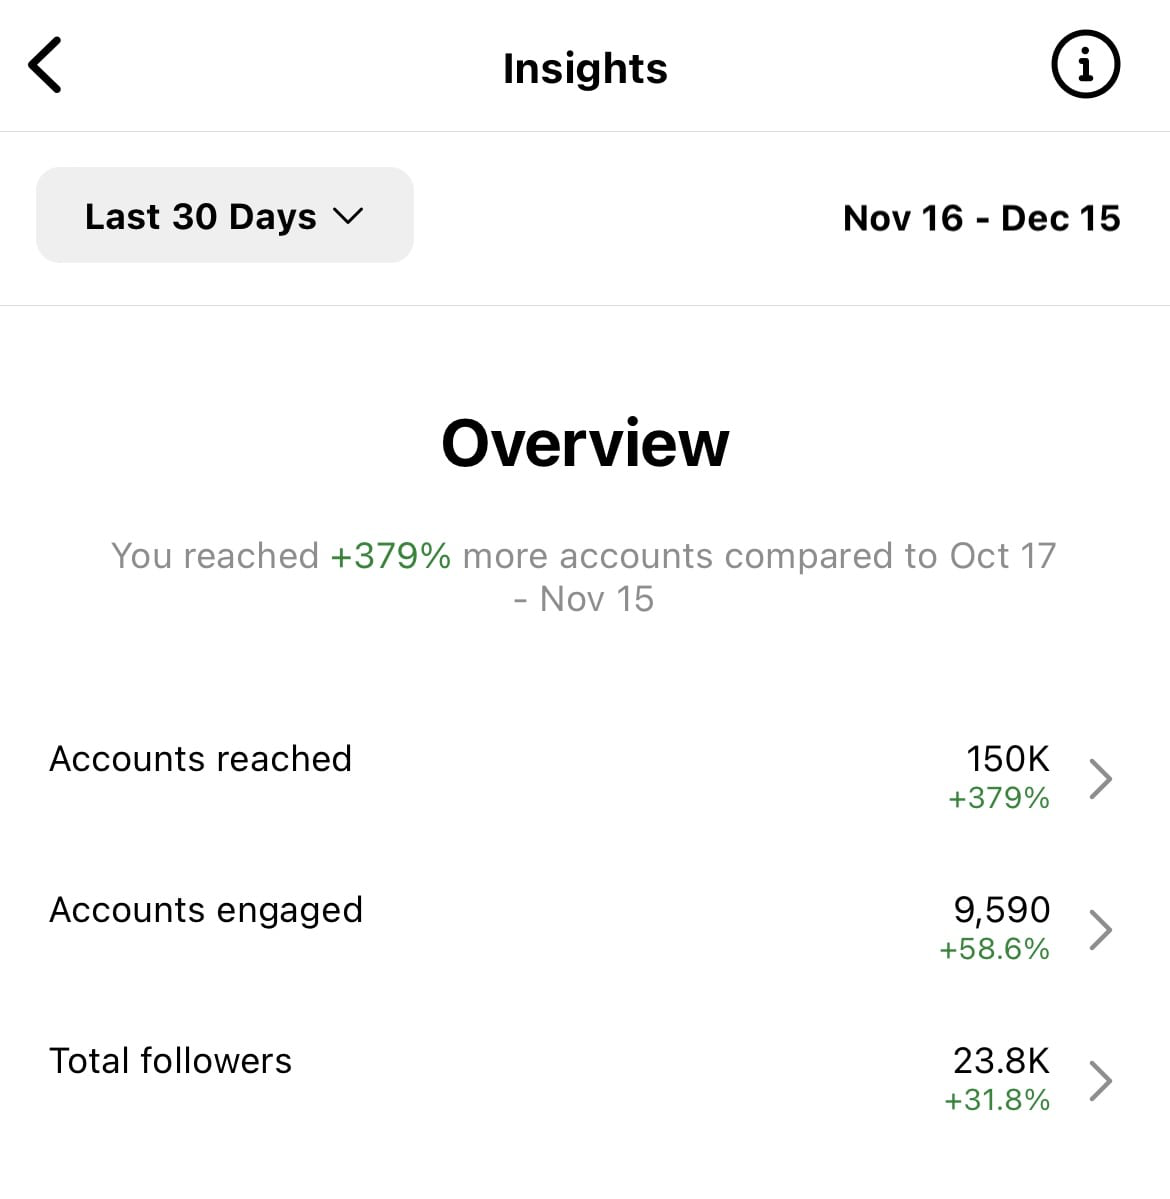 instagram-insights-1.png